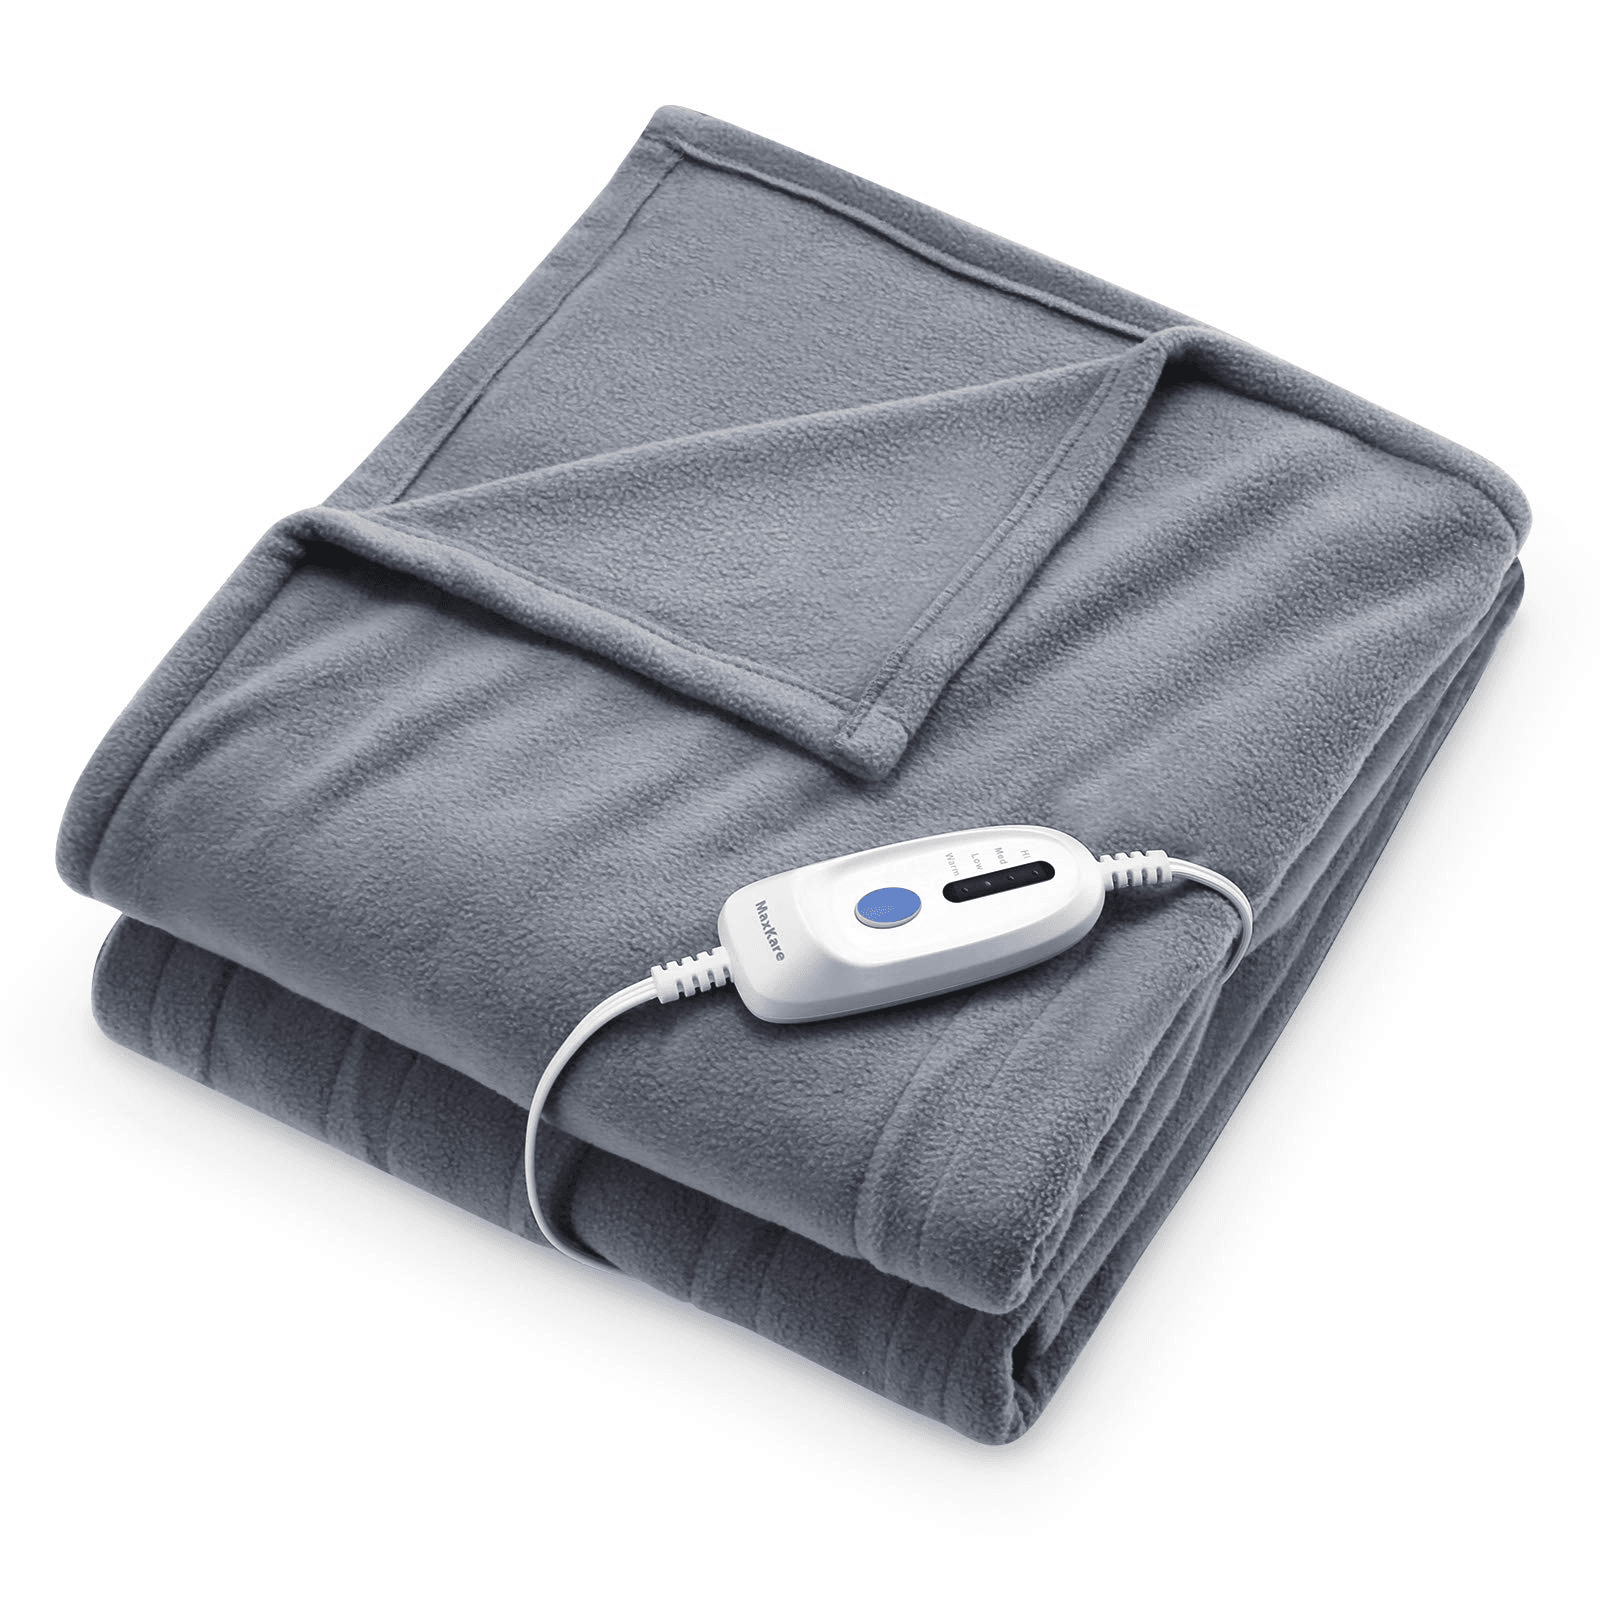 Maxkare Electric Blanket 72 x 84 Full Size Flannel Heated Throw